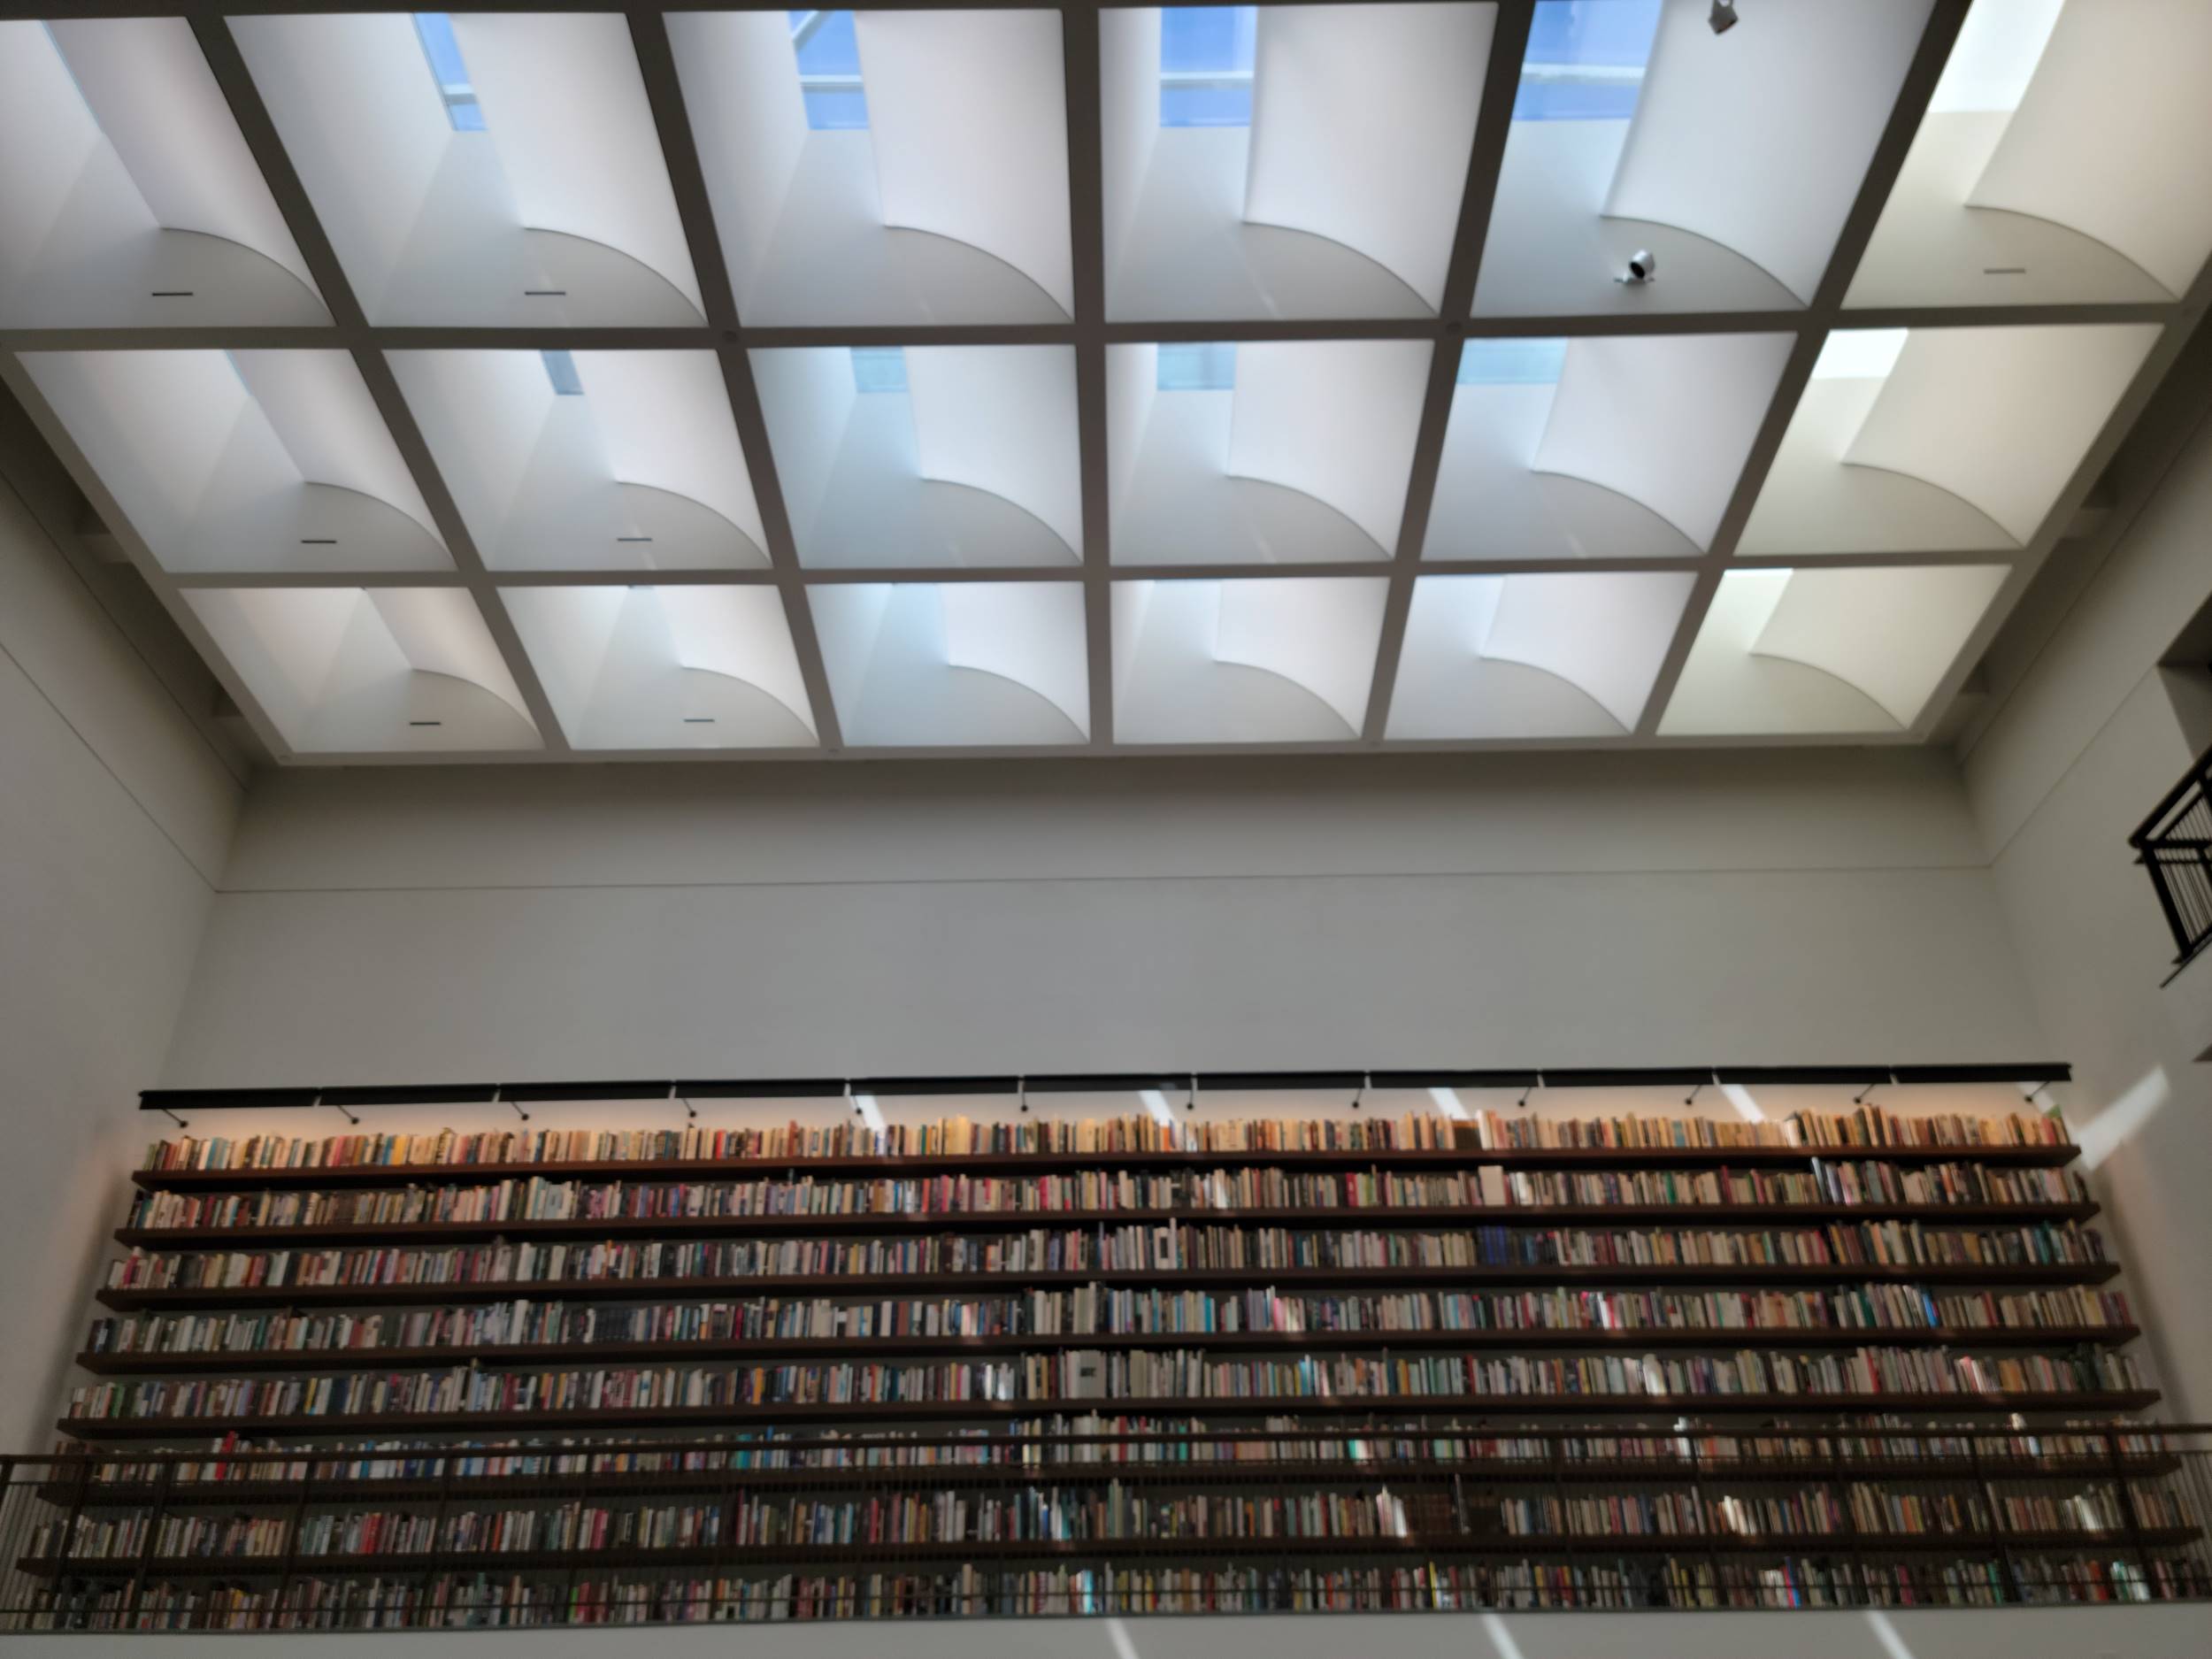 Shelves of books in the second story of a library. The ceiling is portions of glass